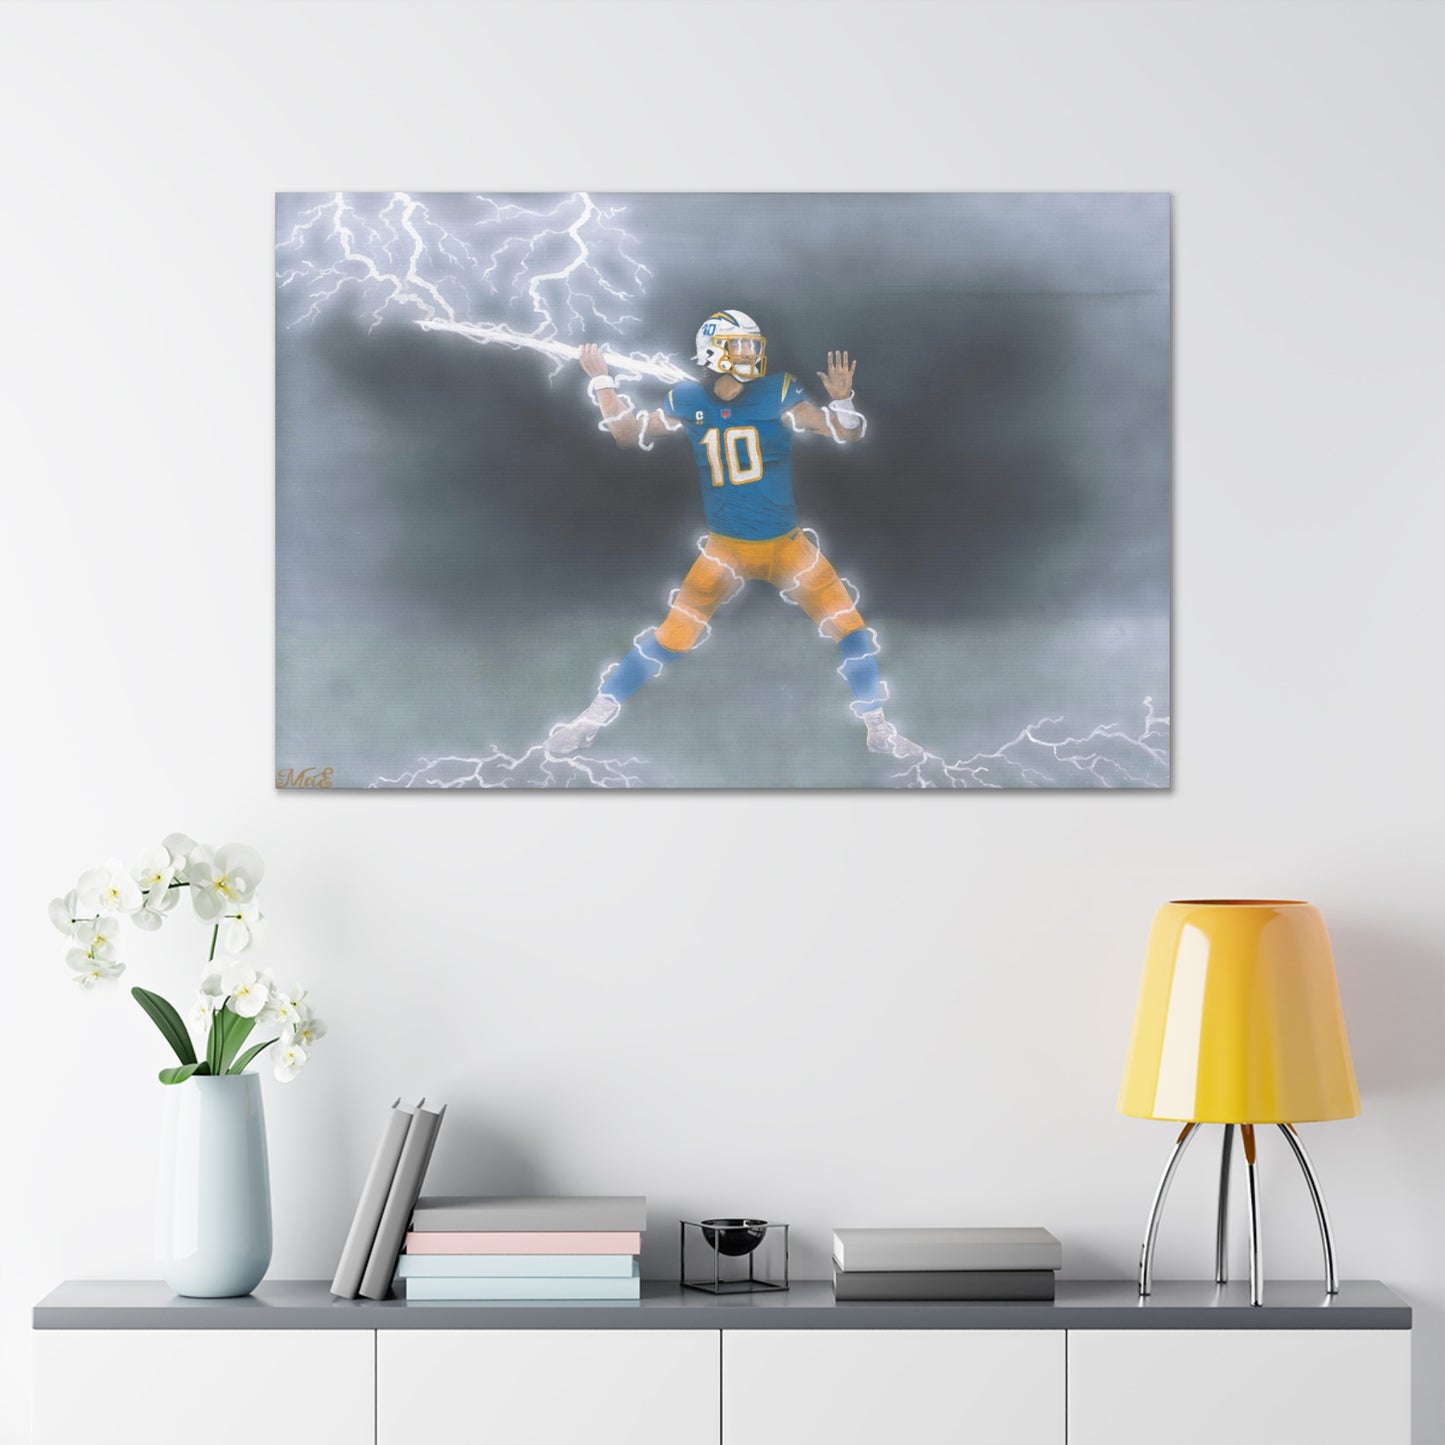 Chargers Justin Herbert Canvas Gallery Wrap